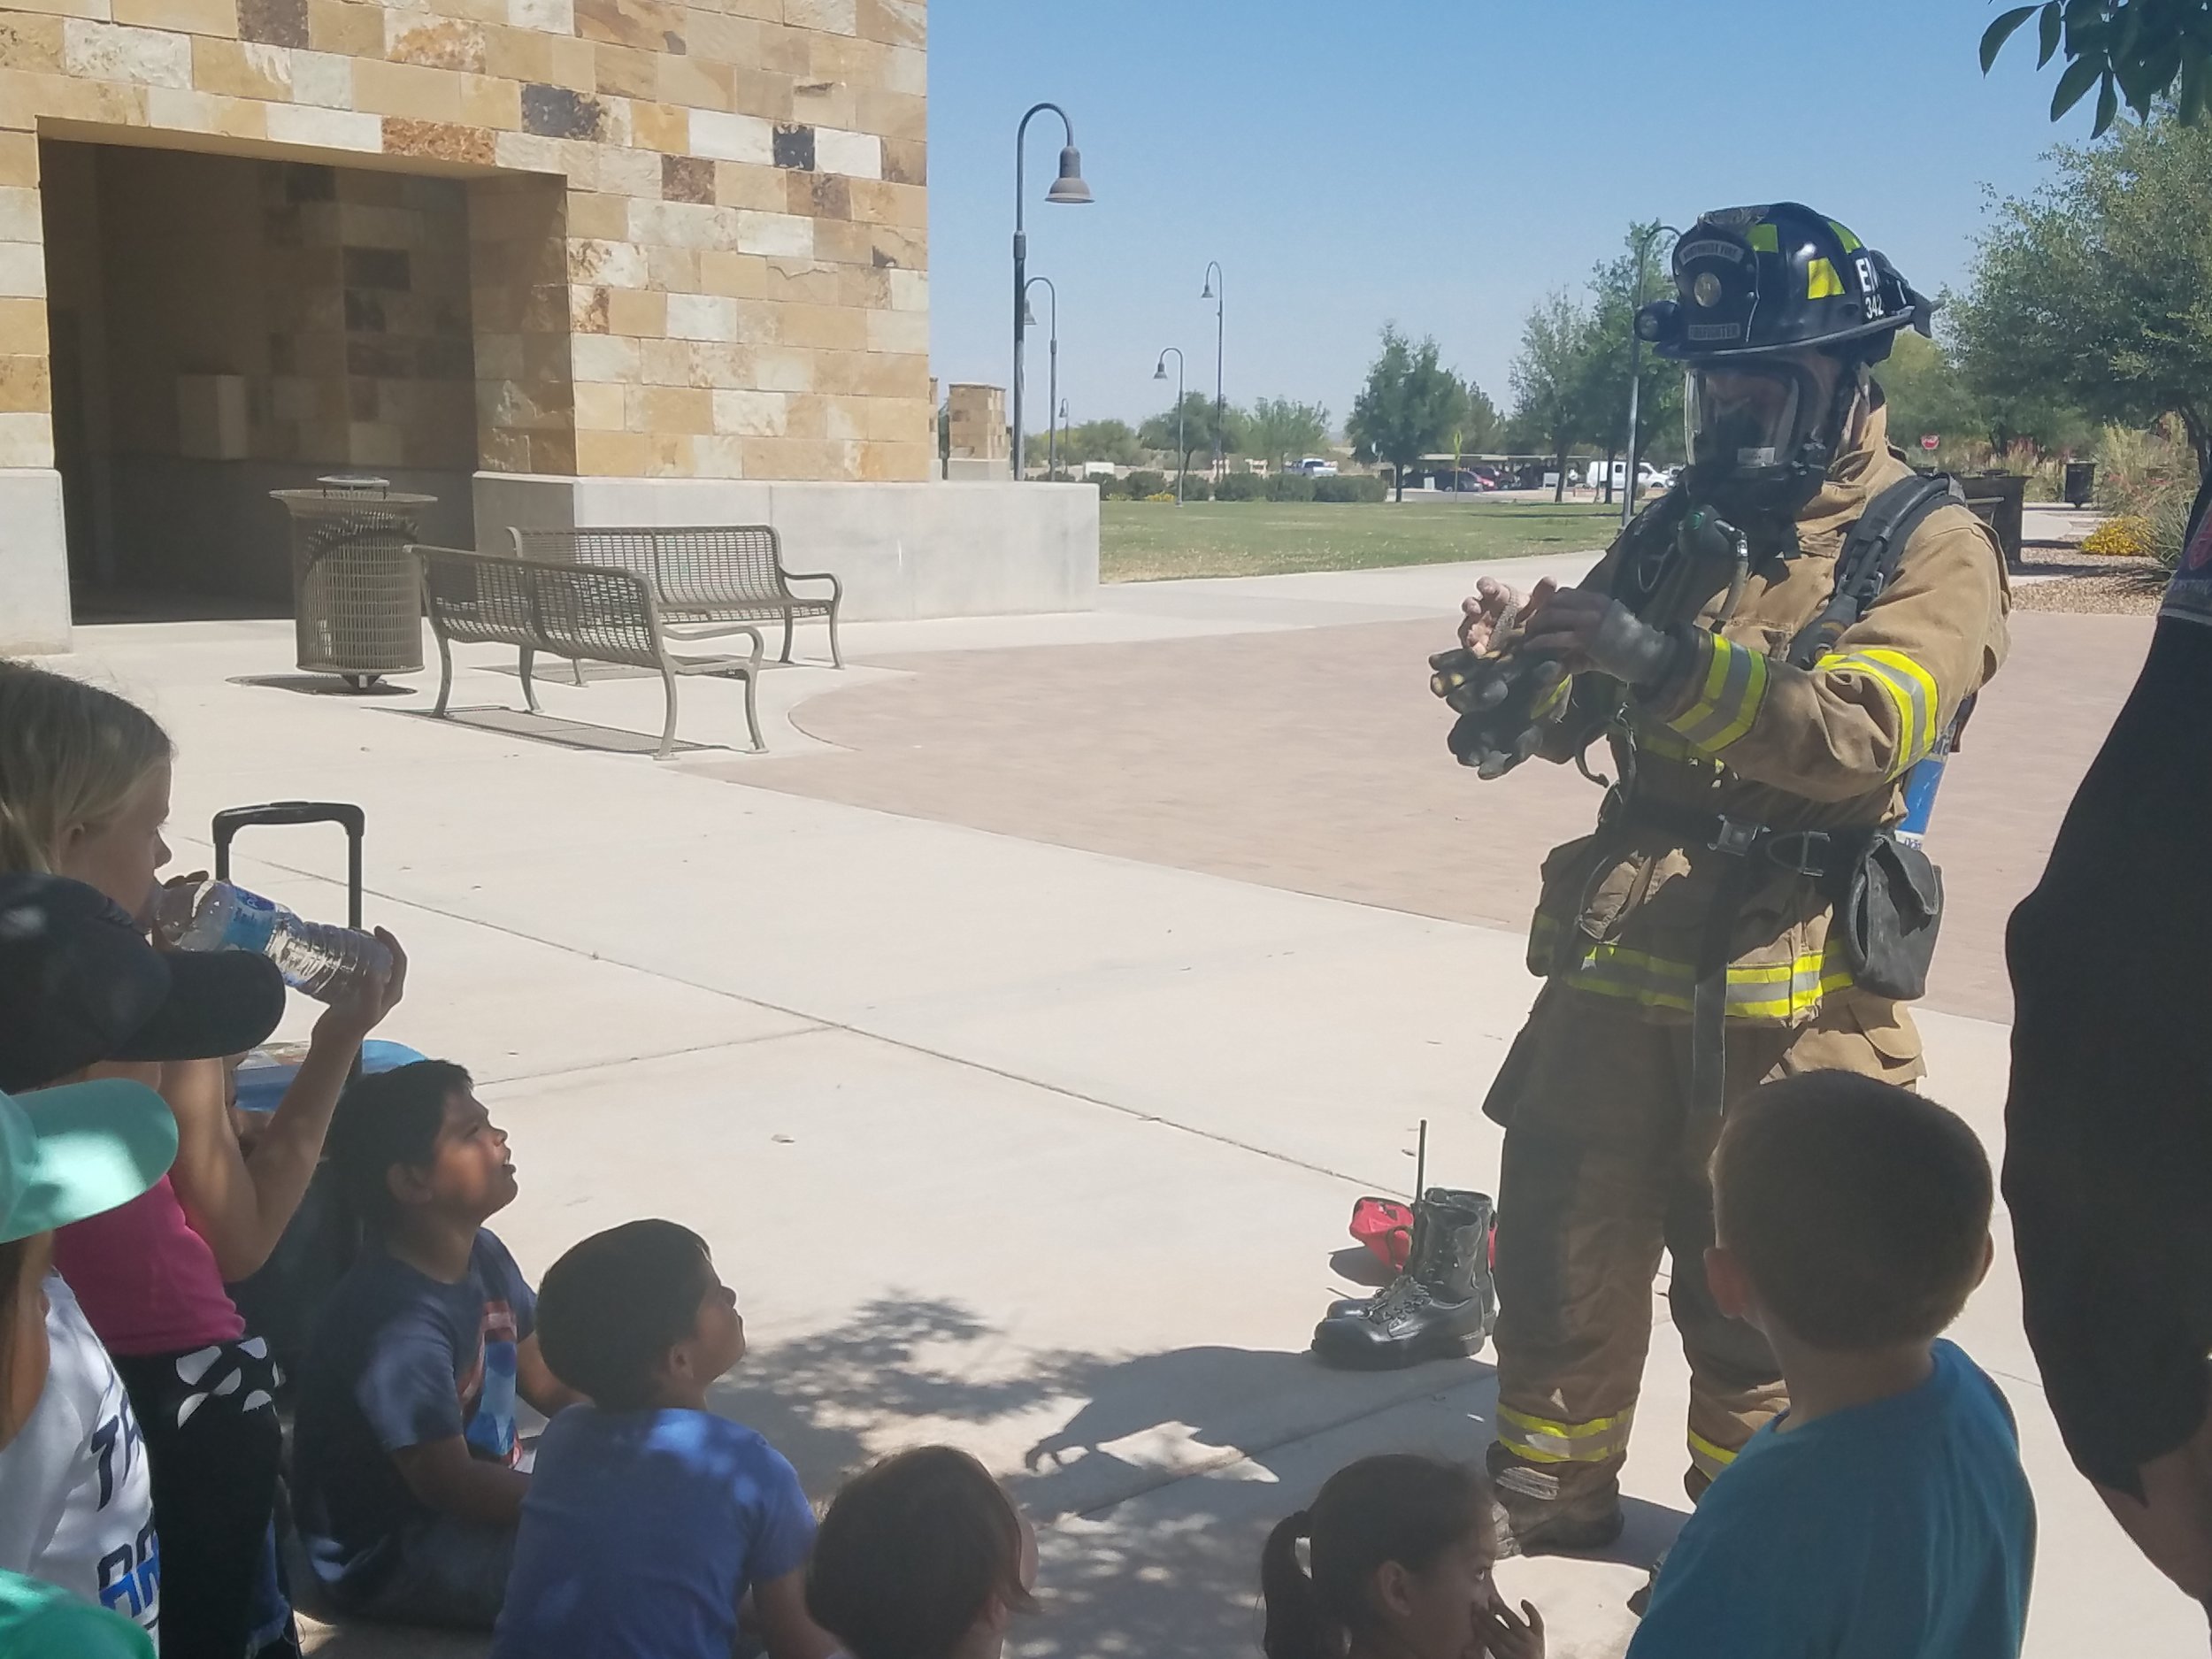 Northwest Fire District provides a demonstration